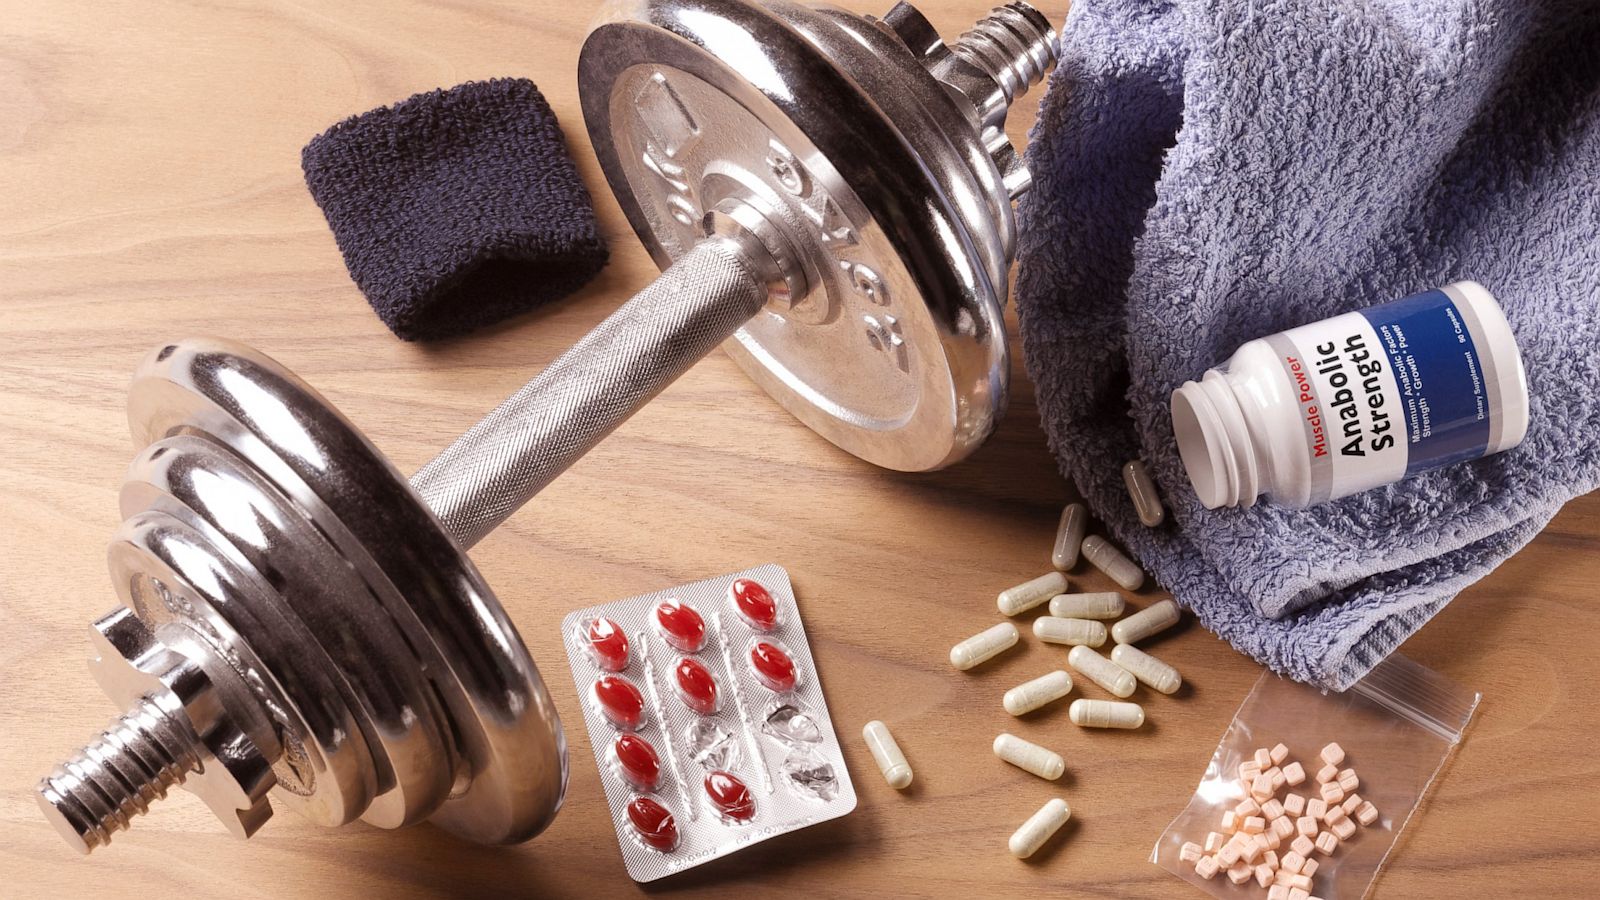 How Do Steroids Affect Athletes' Performance?